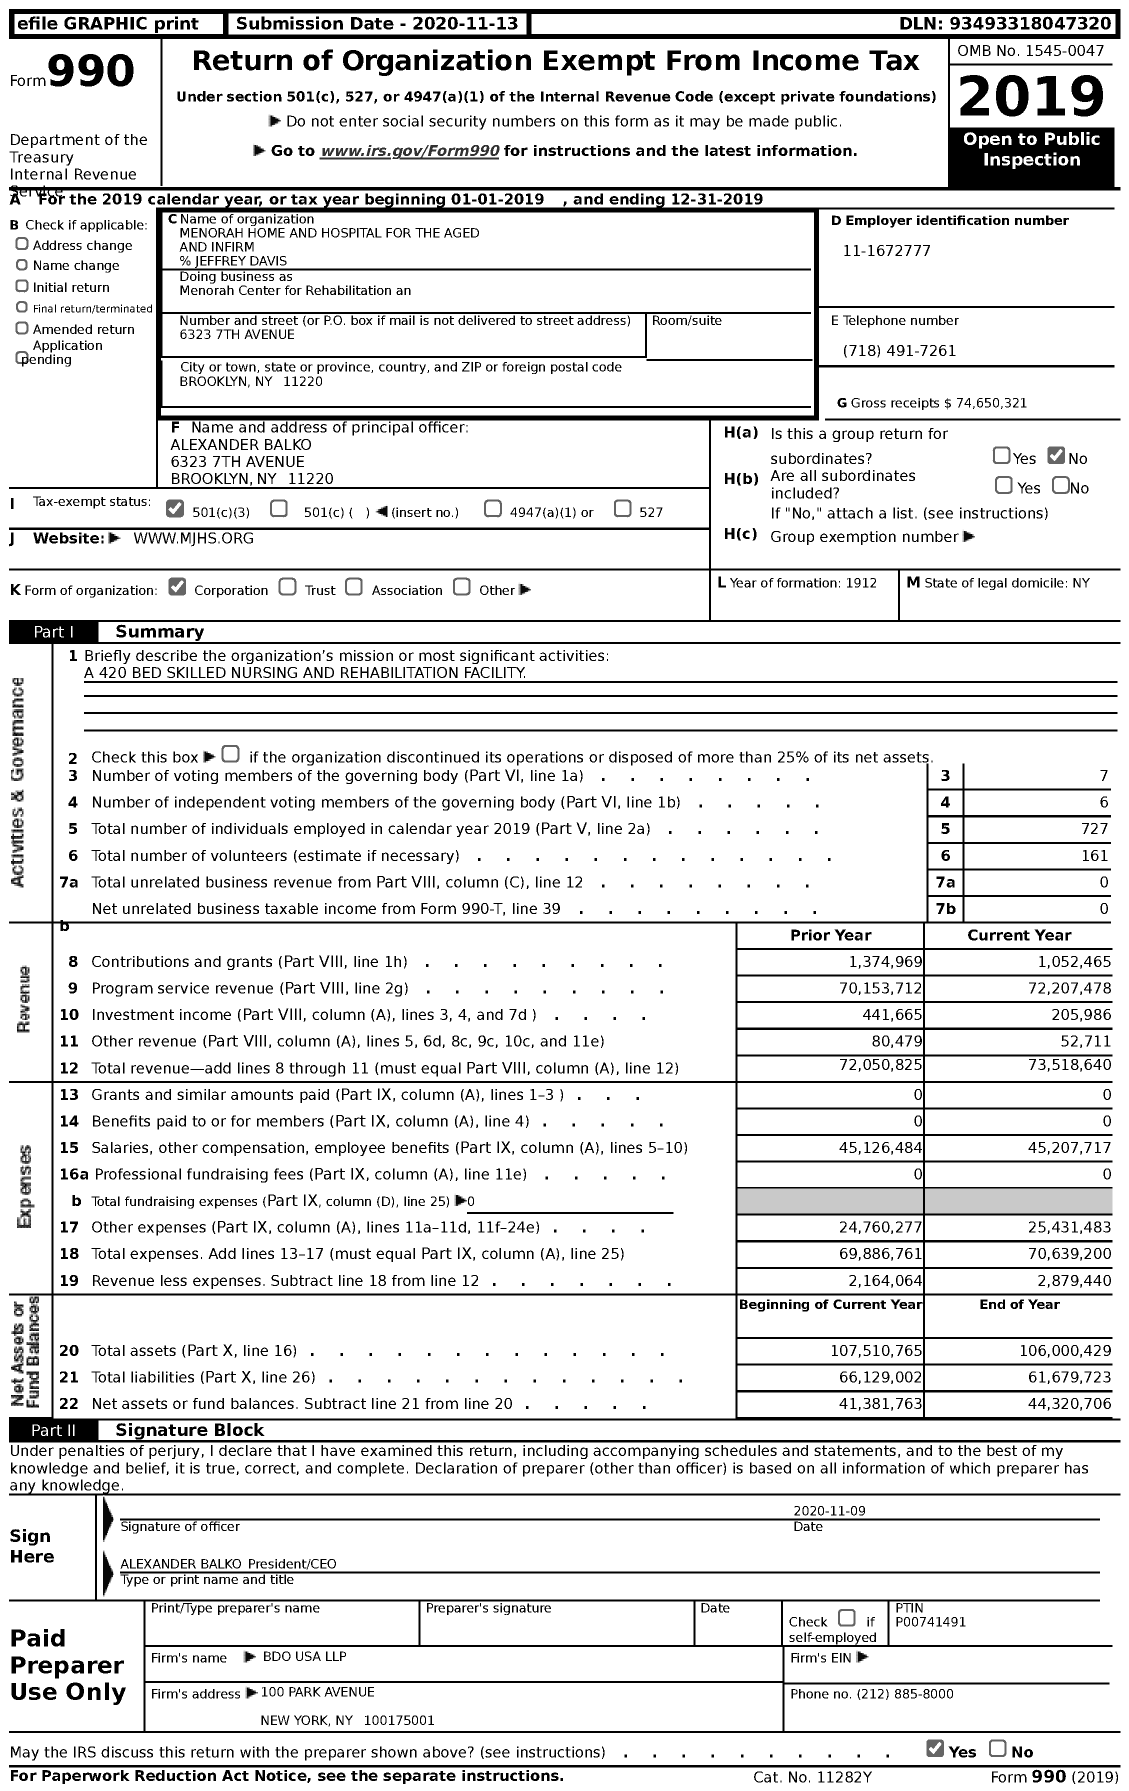 Image of first page of 2019 Form 990 for Menorah Center for Rehabilitation an